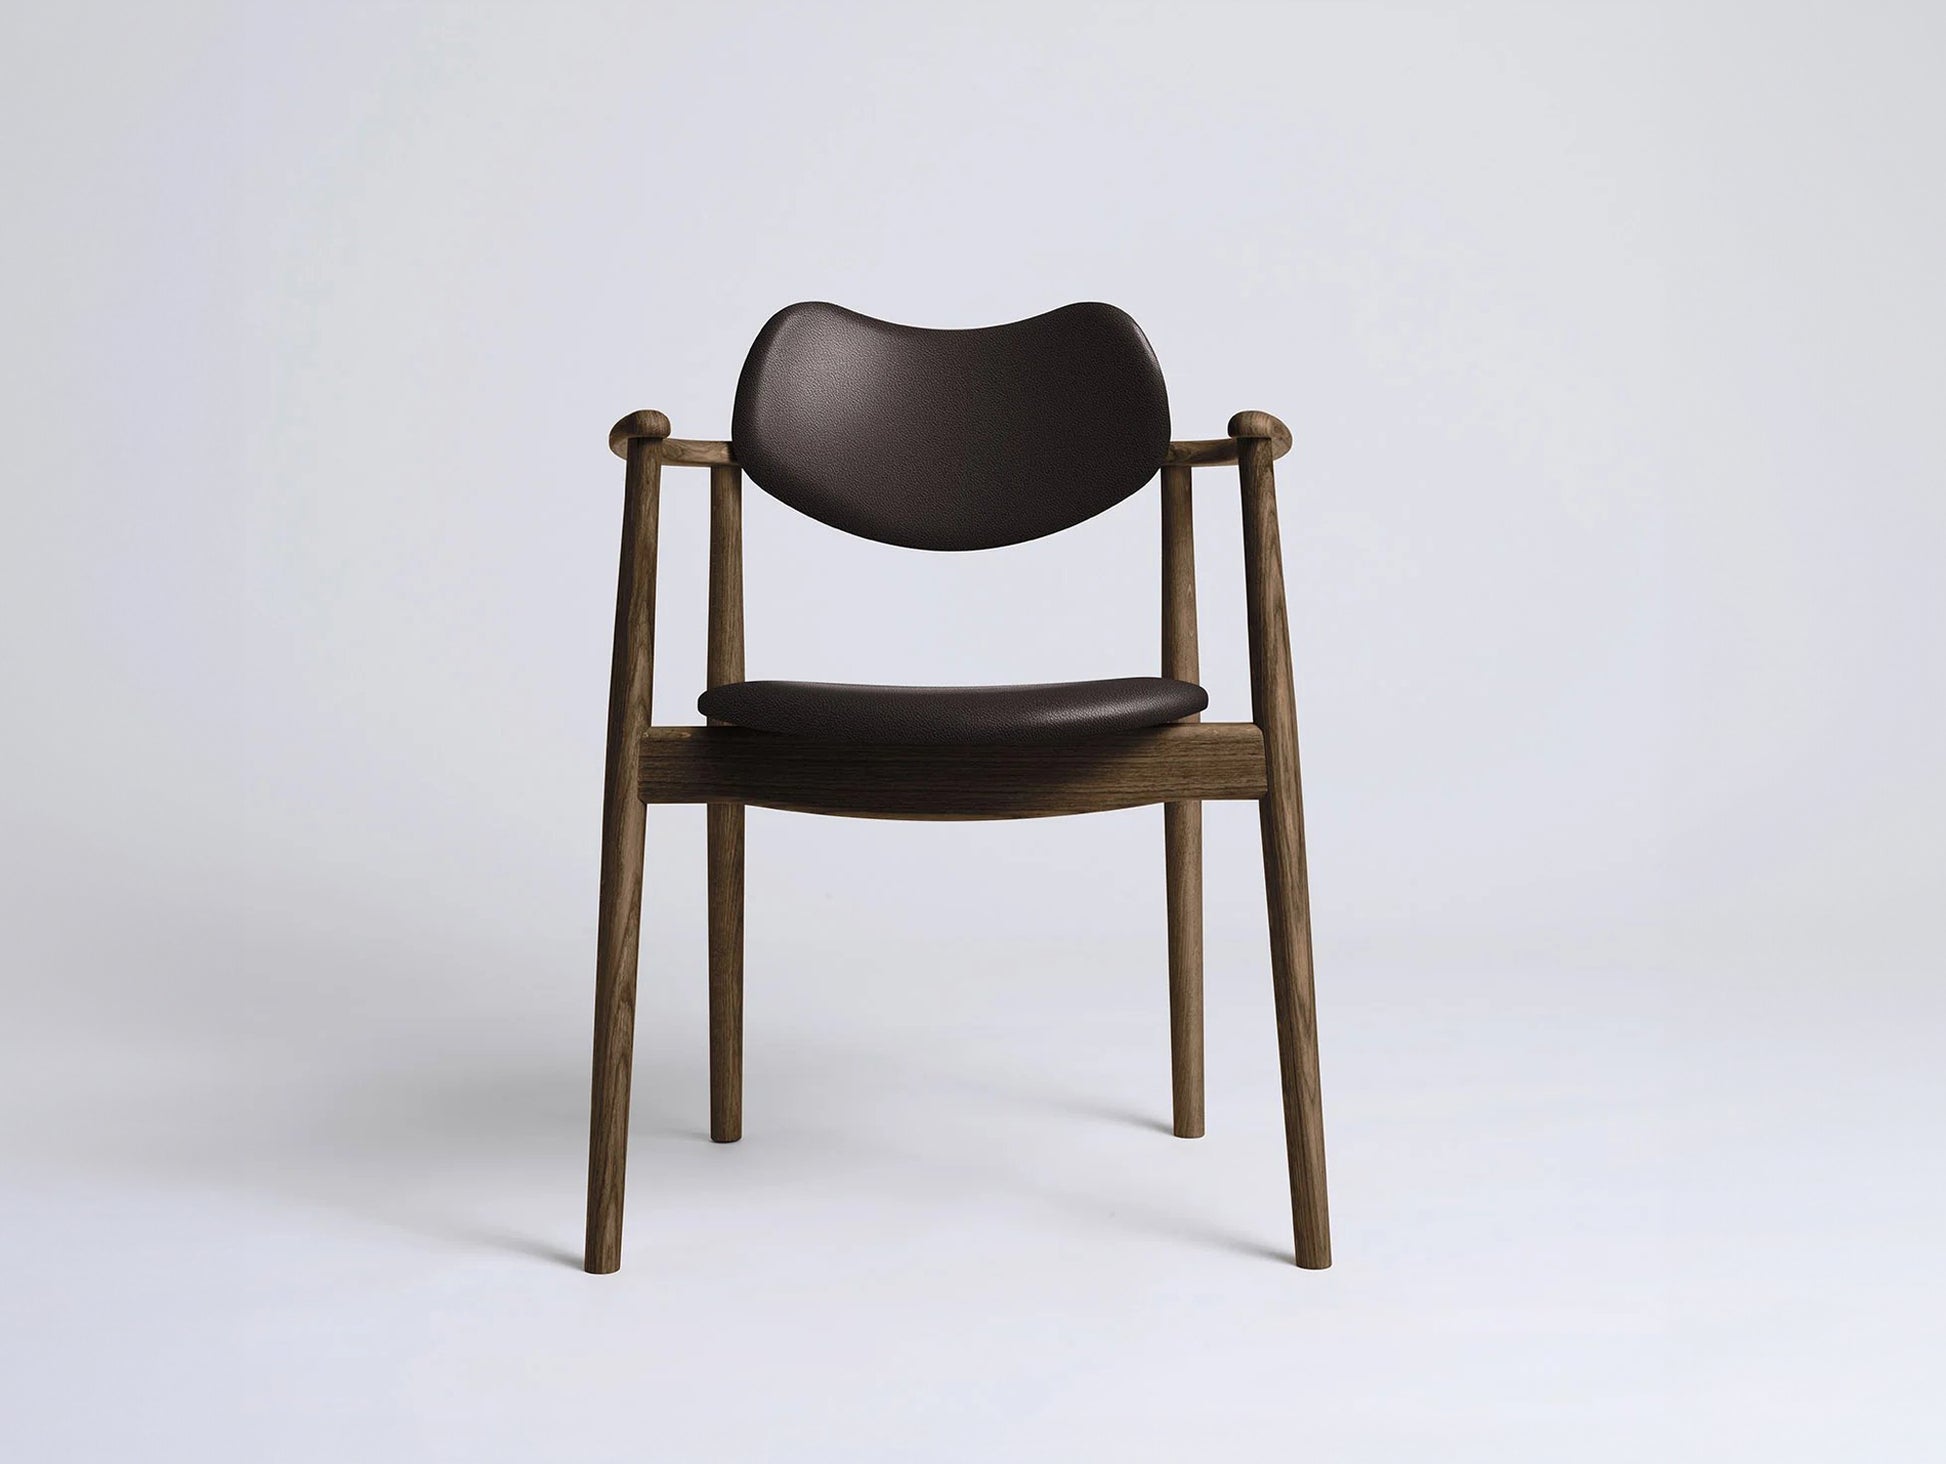 Regatta Chair Seat and Back Upholstered by Ro Collection - Smoked Oak / Standard Dark Brown Leather